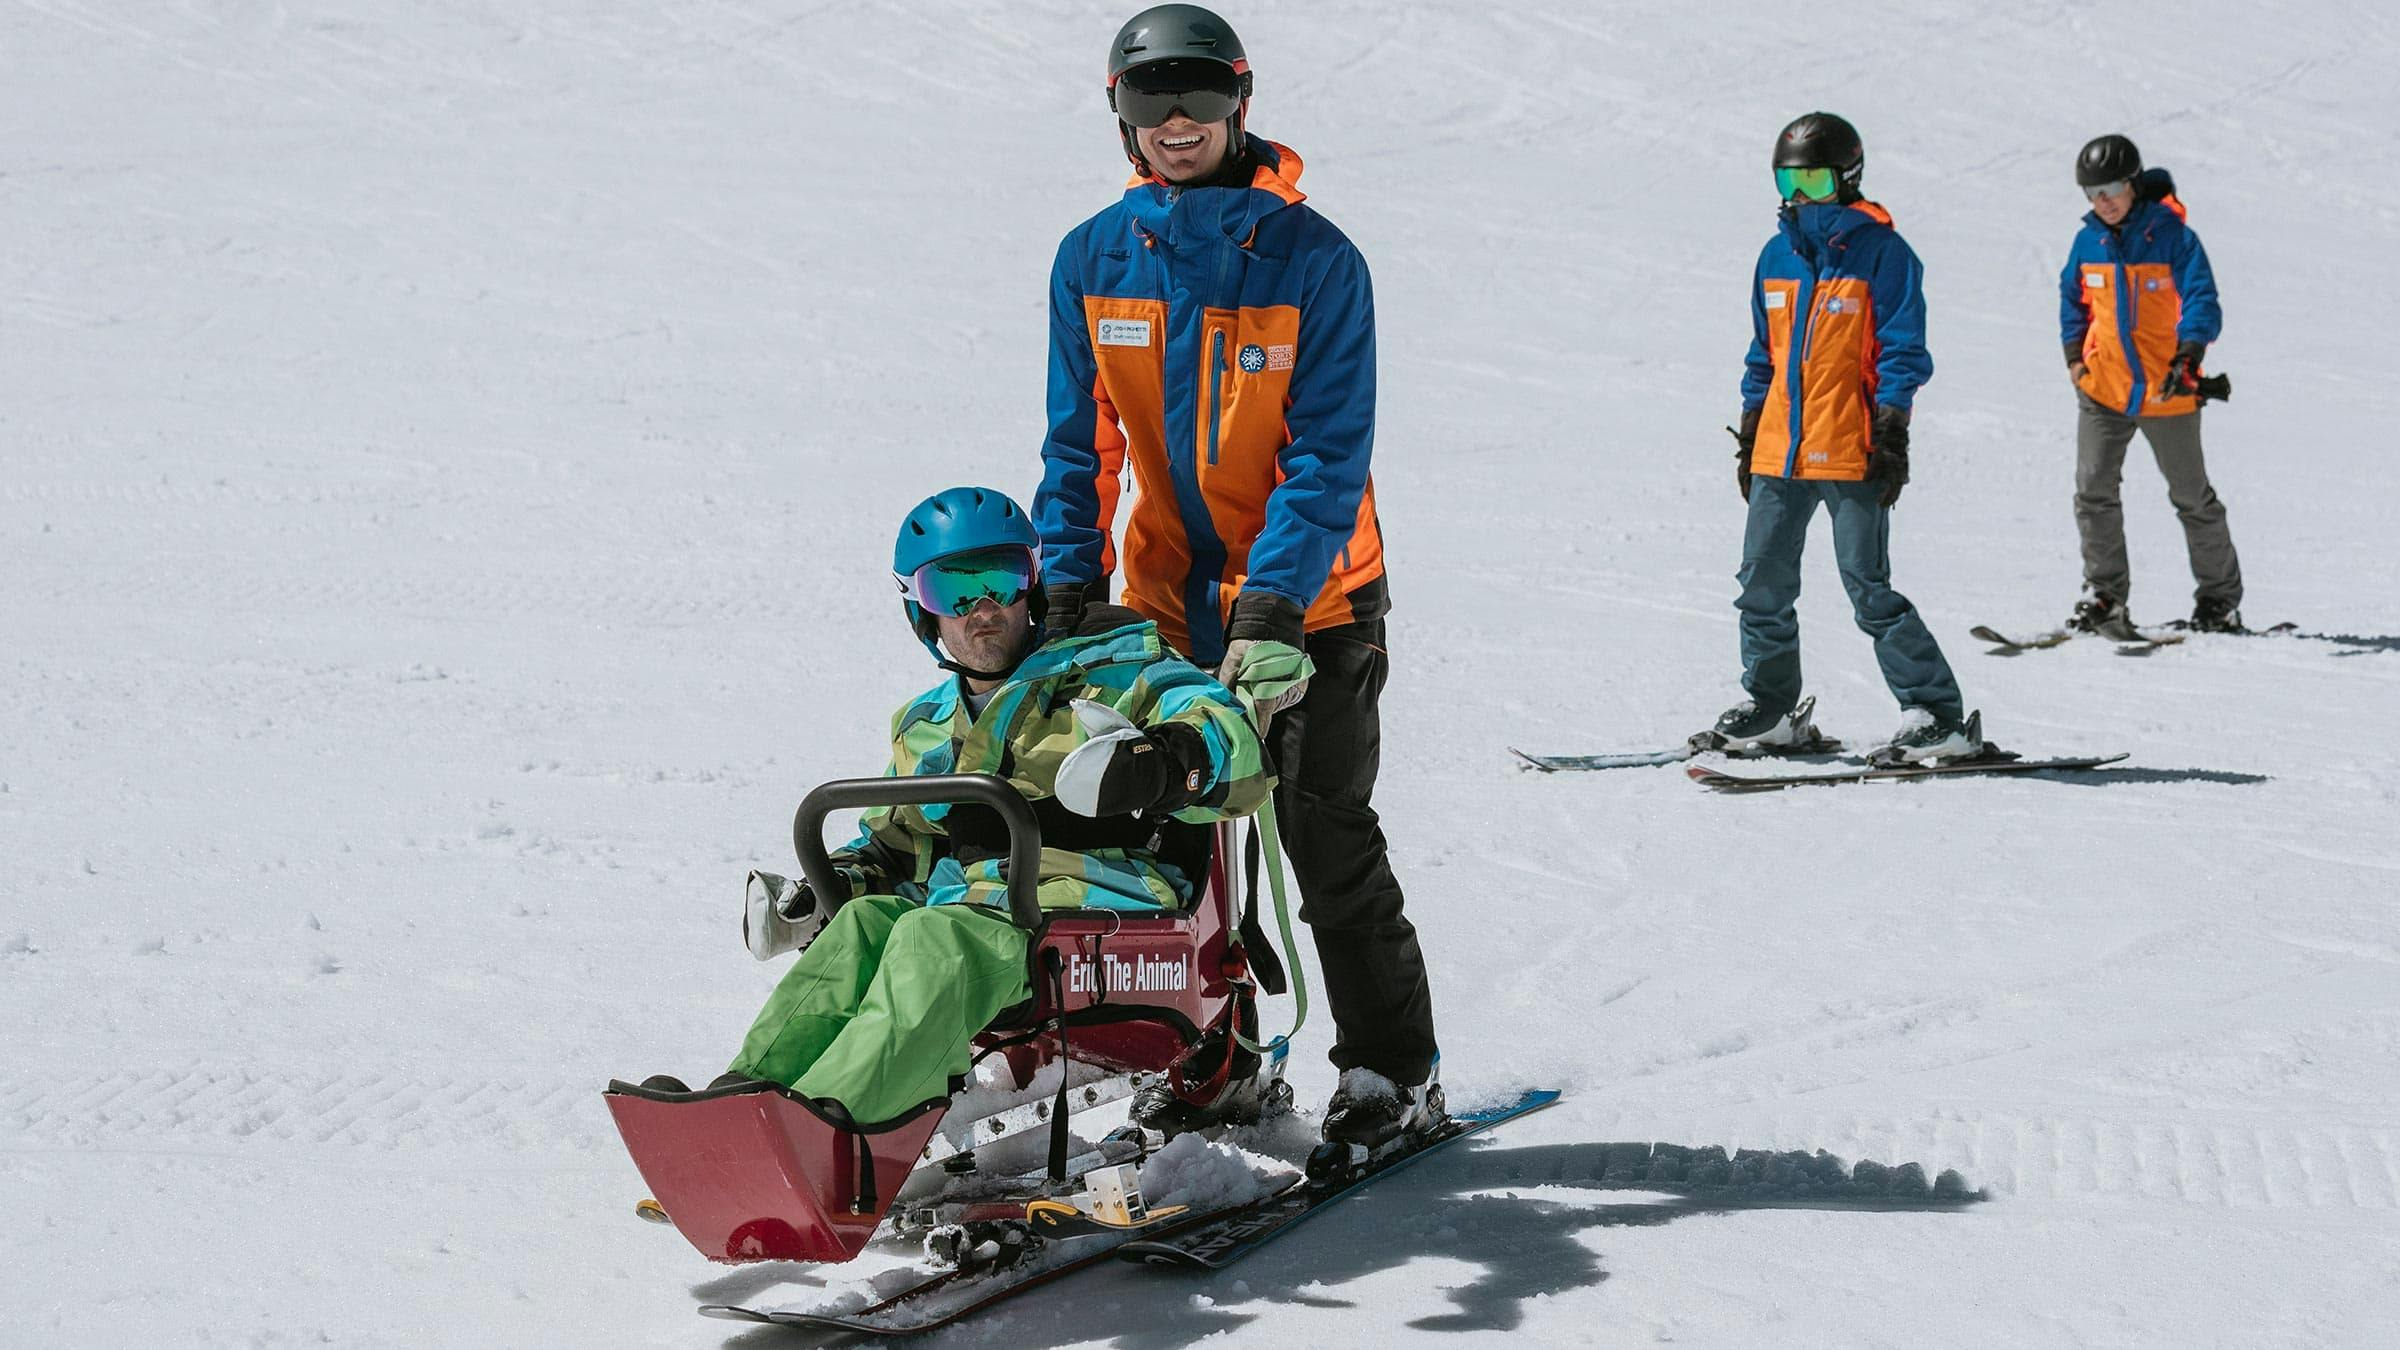 Disabled Sports of Eastern Sierra guiding an adaptive skier